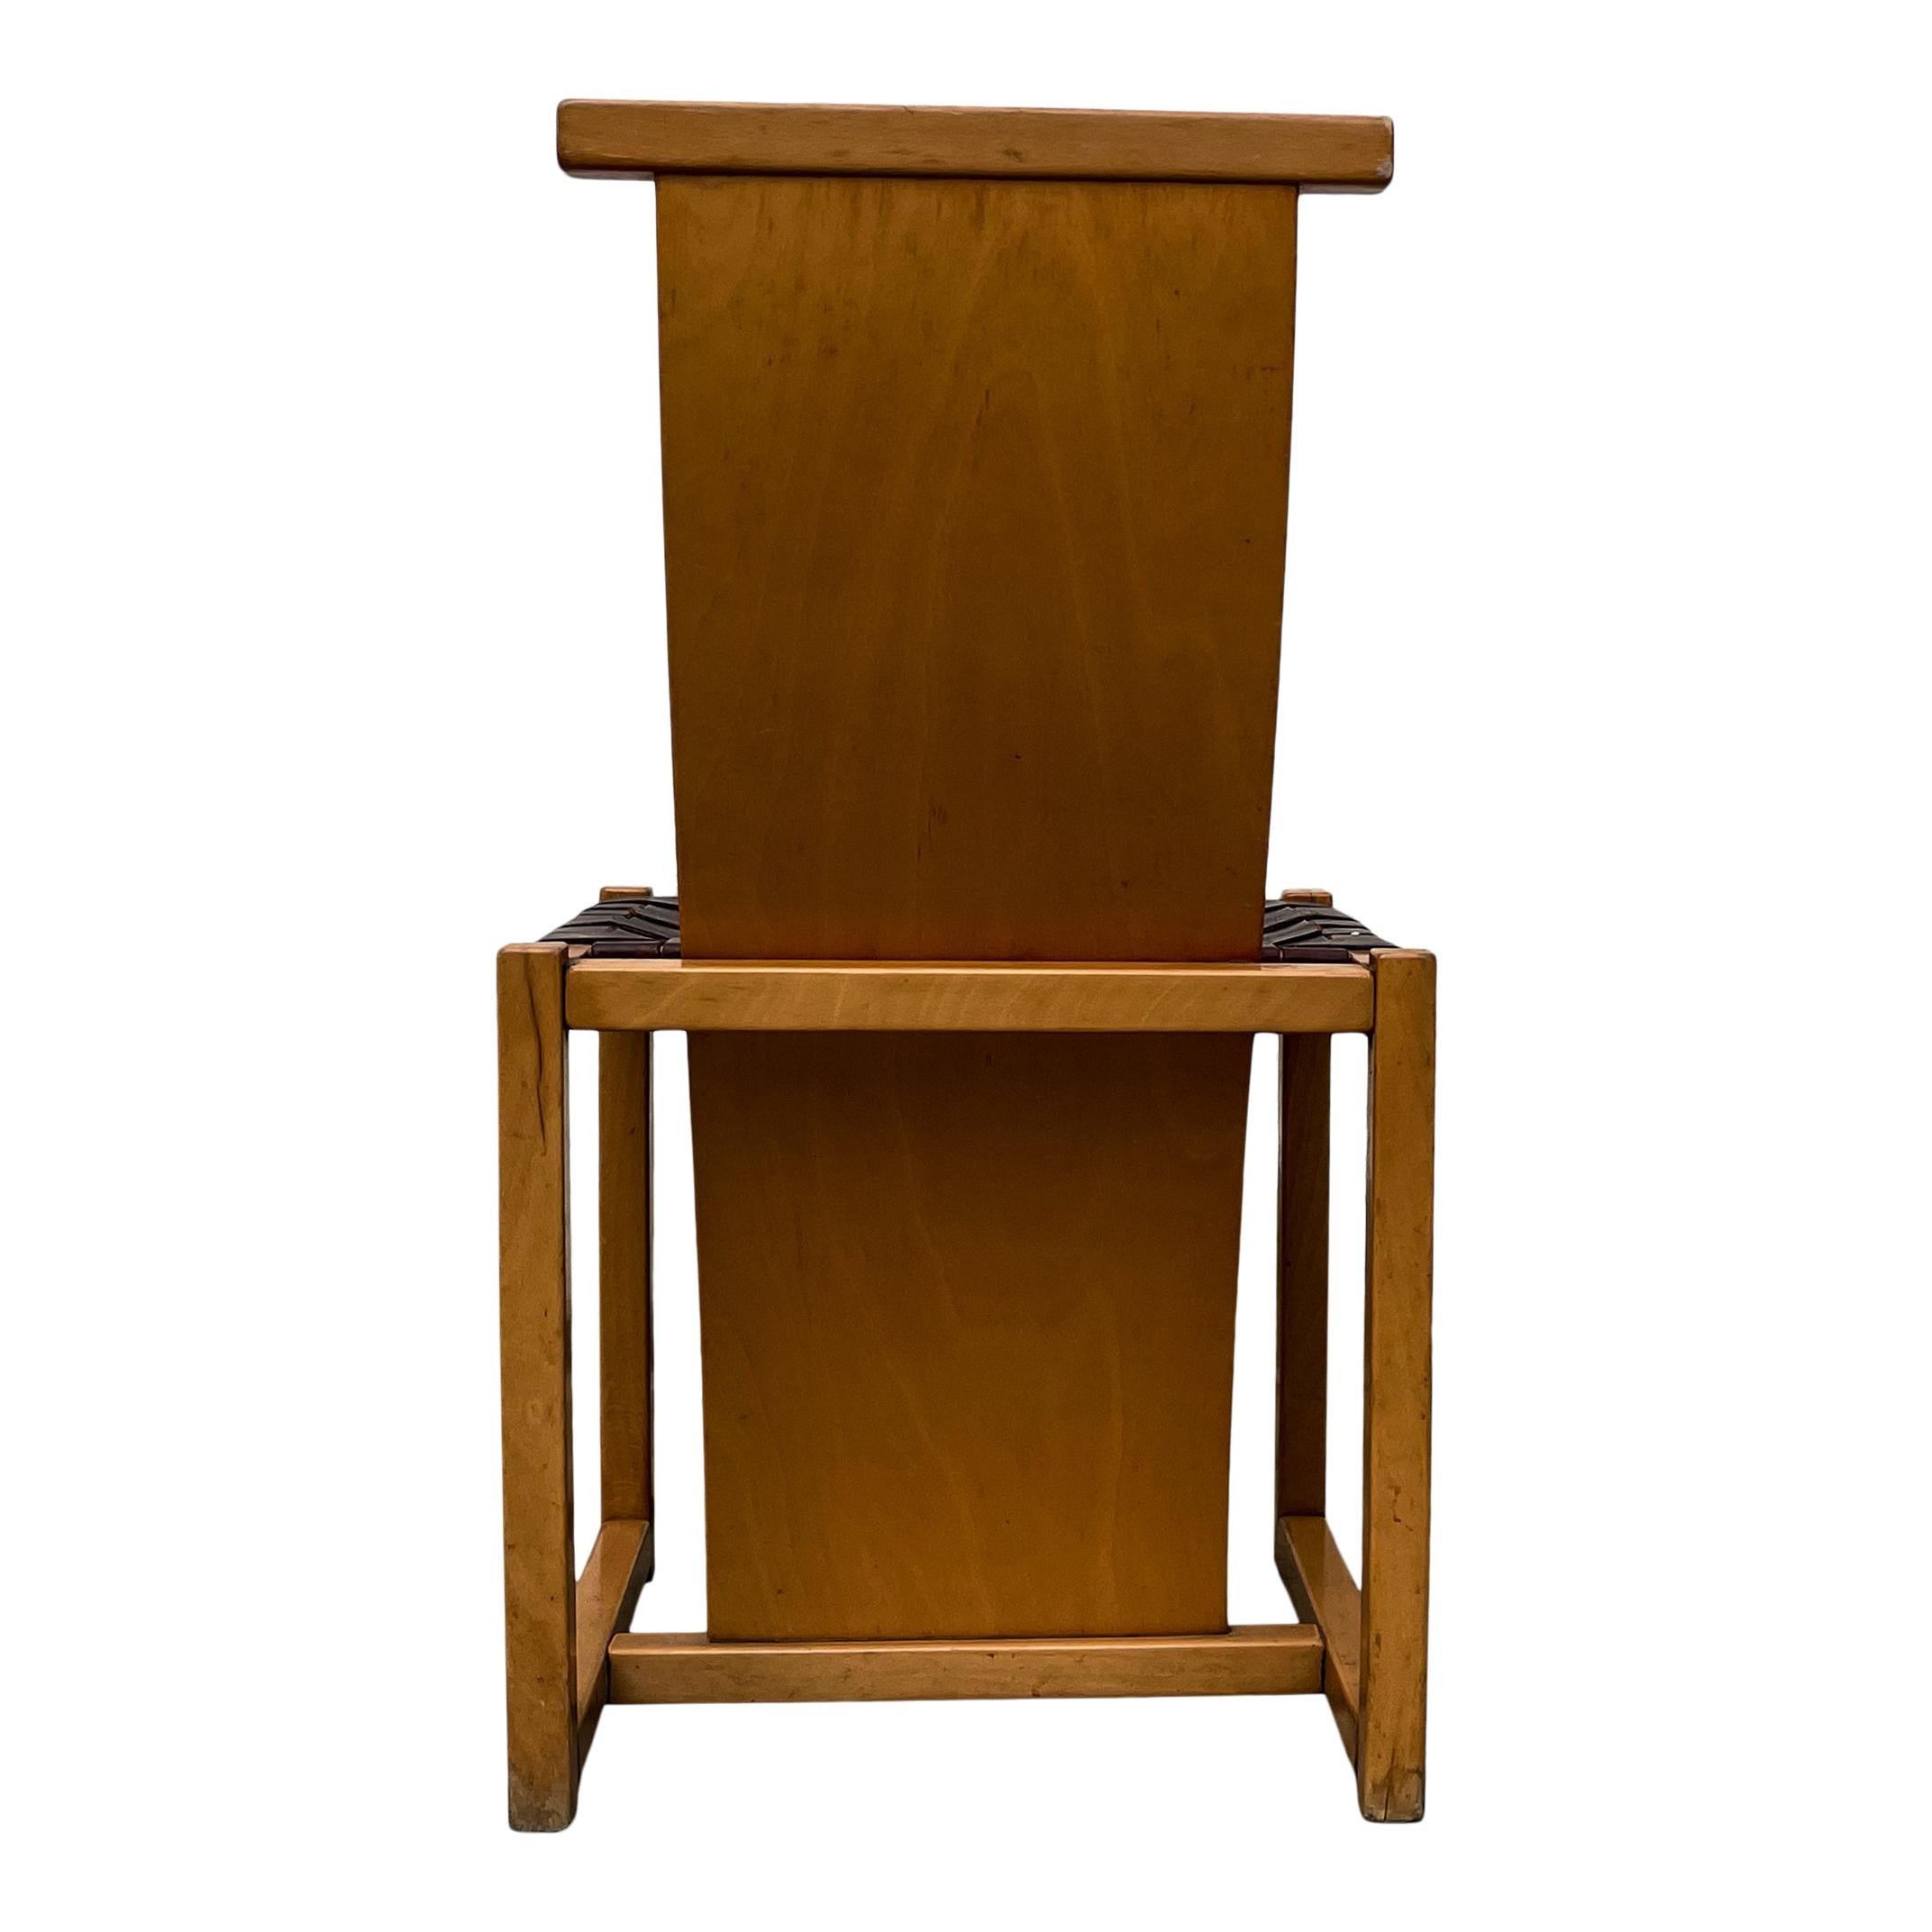 Midcentury Modern Italian Design Beech & Leather Dining Chairs, 1970s, Set of 4 For Sale 8